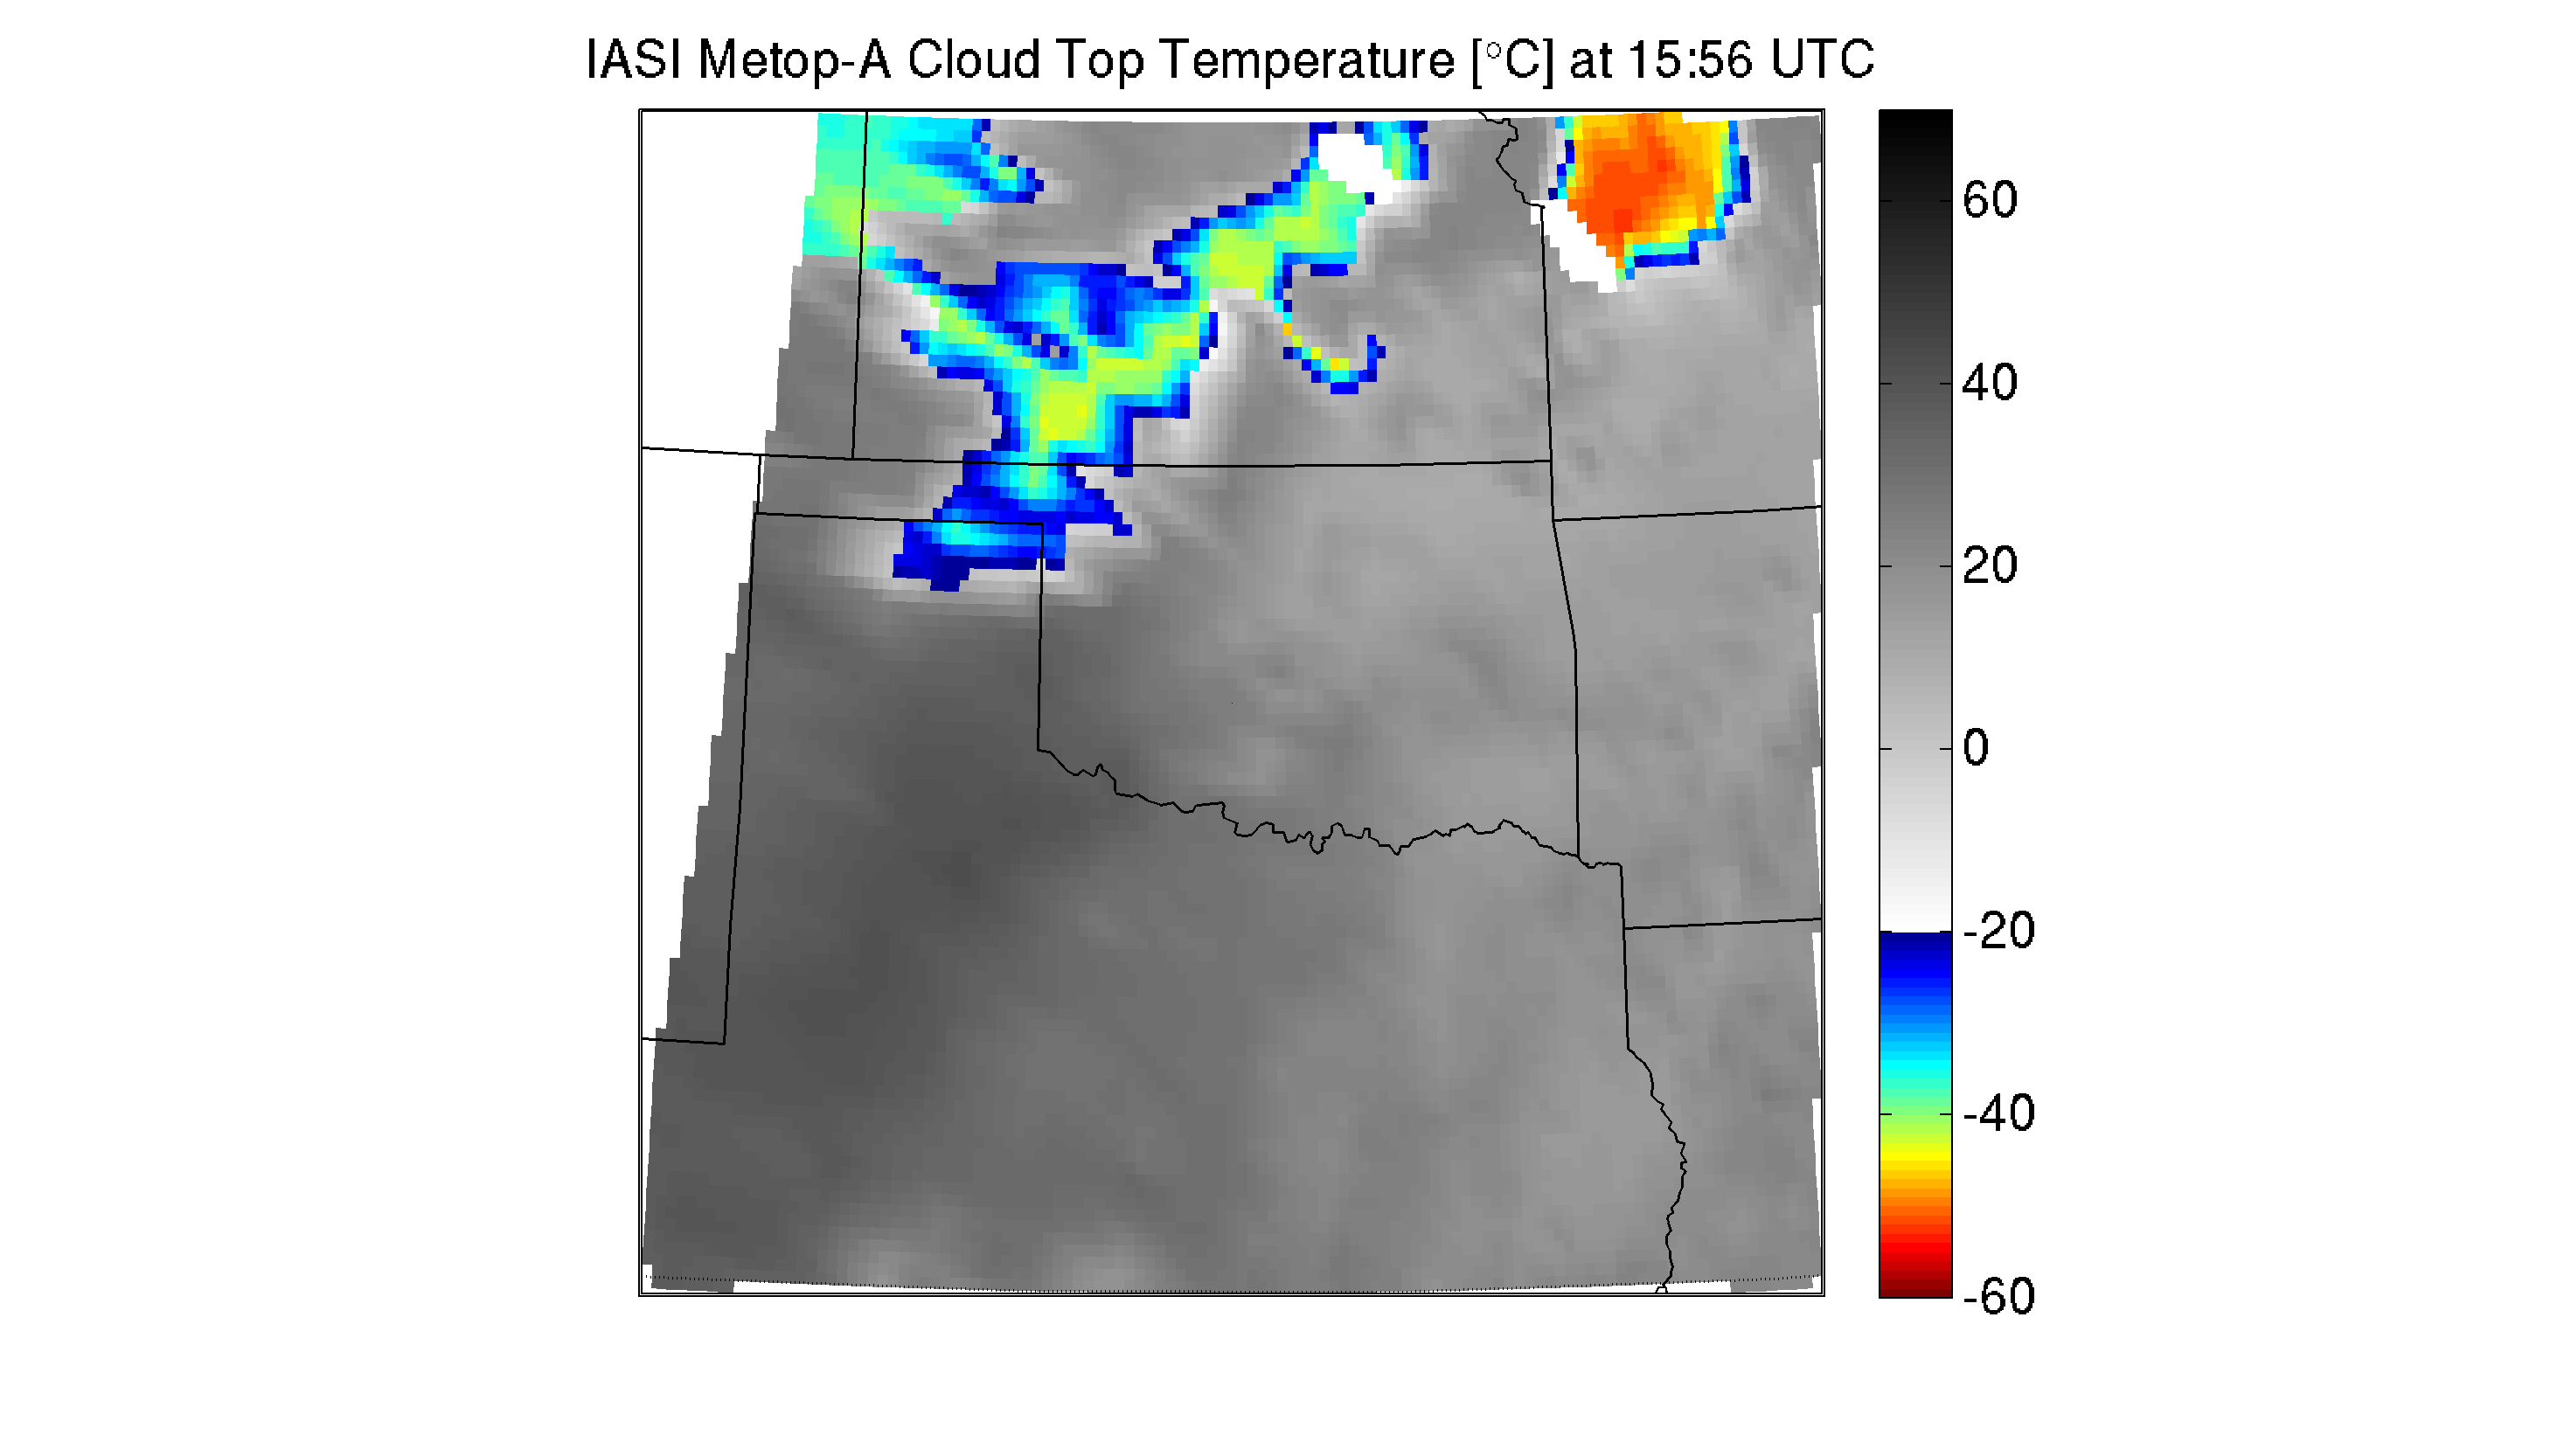 Cloud Top Temperature retrievals from IASI, CrIS, and AIRS sounder instruments